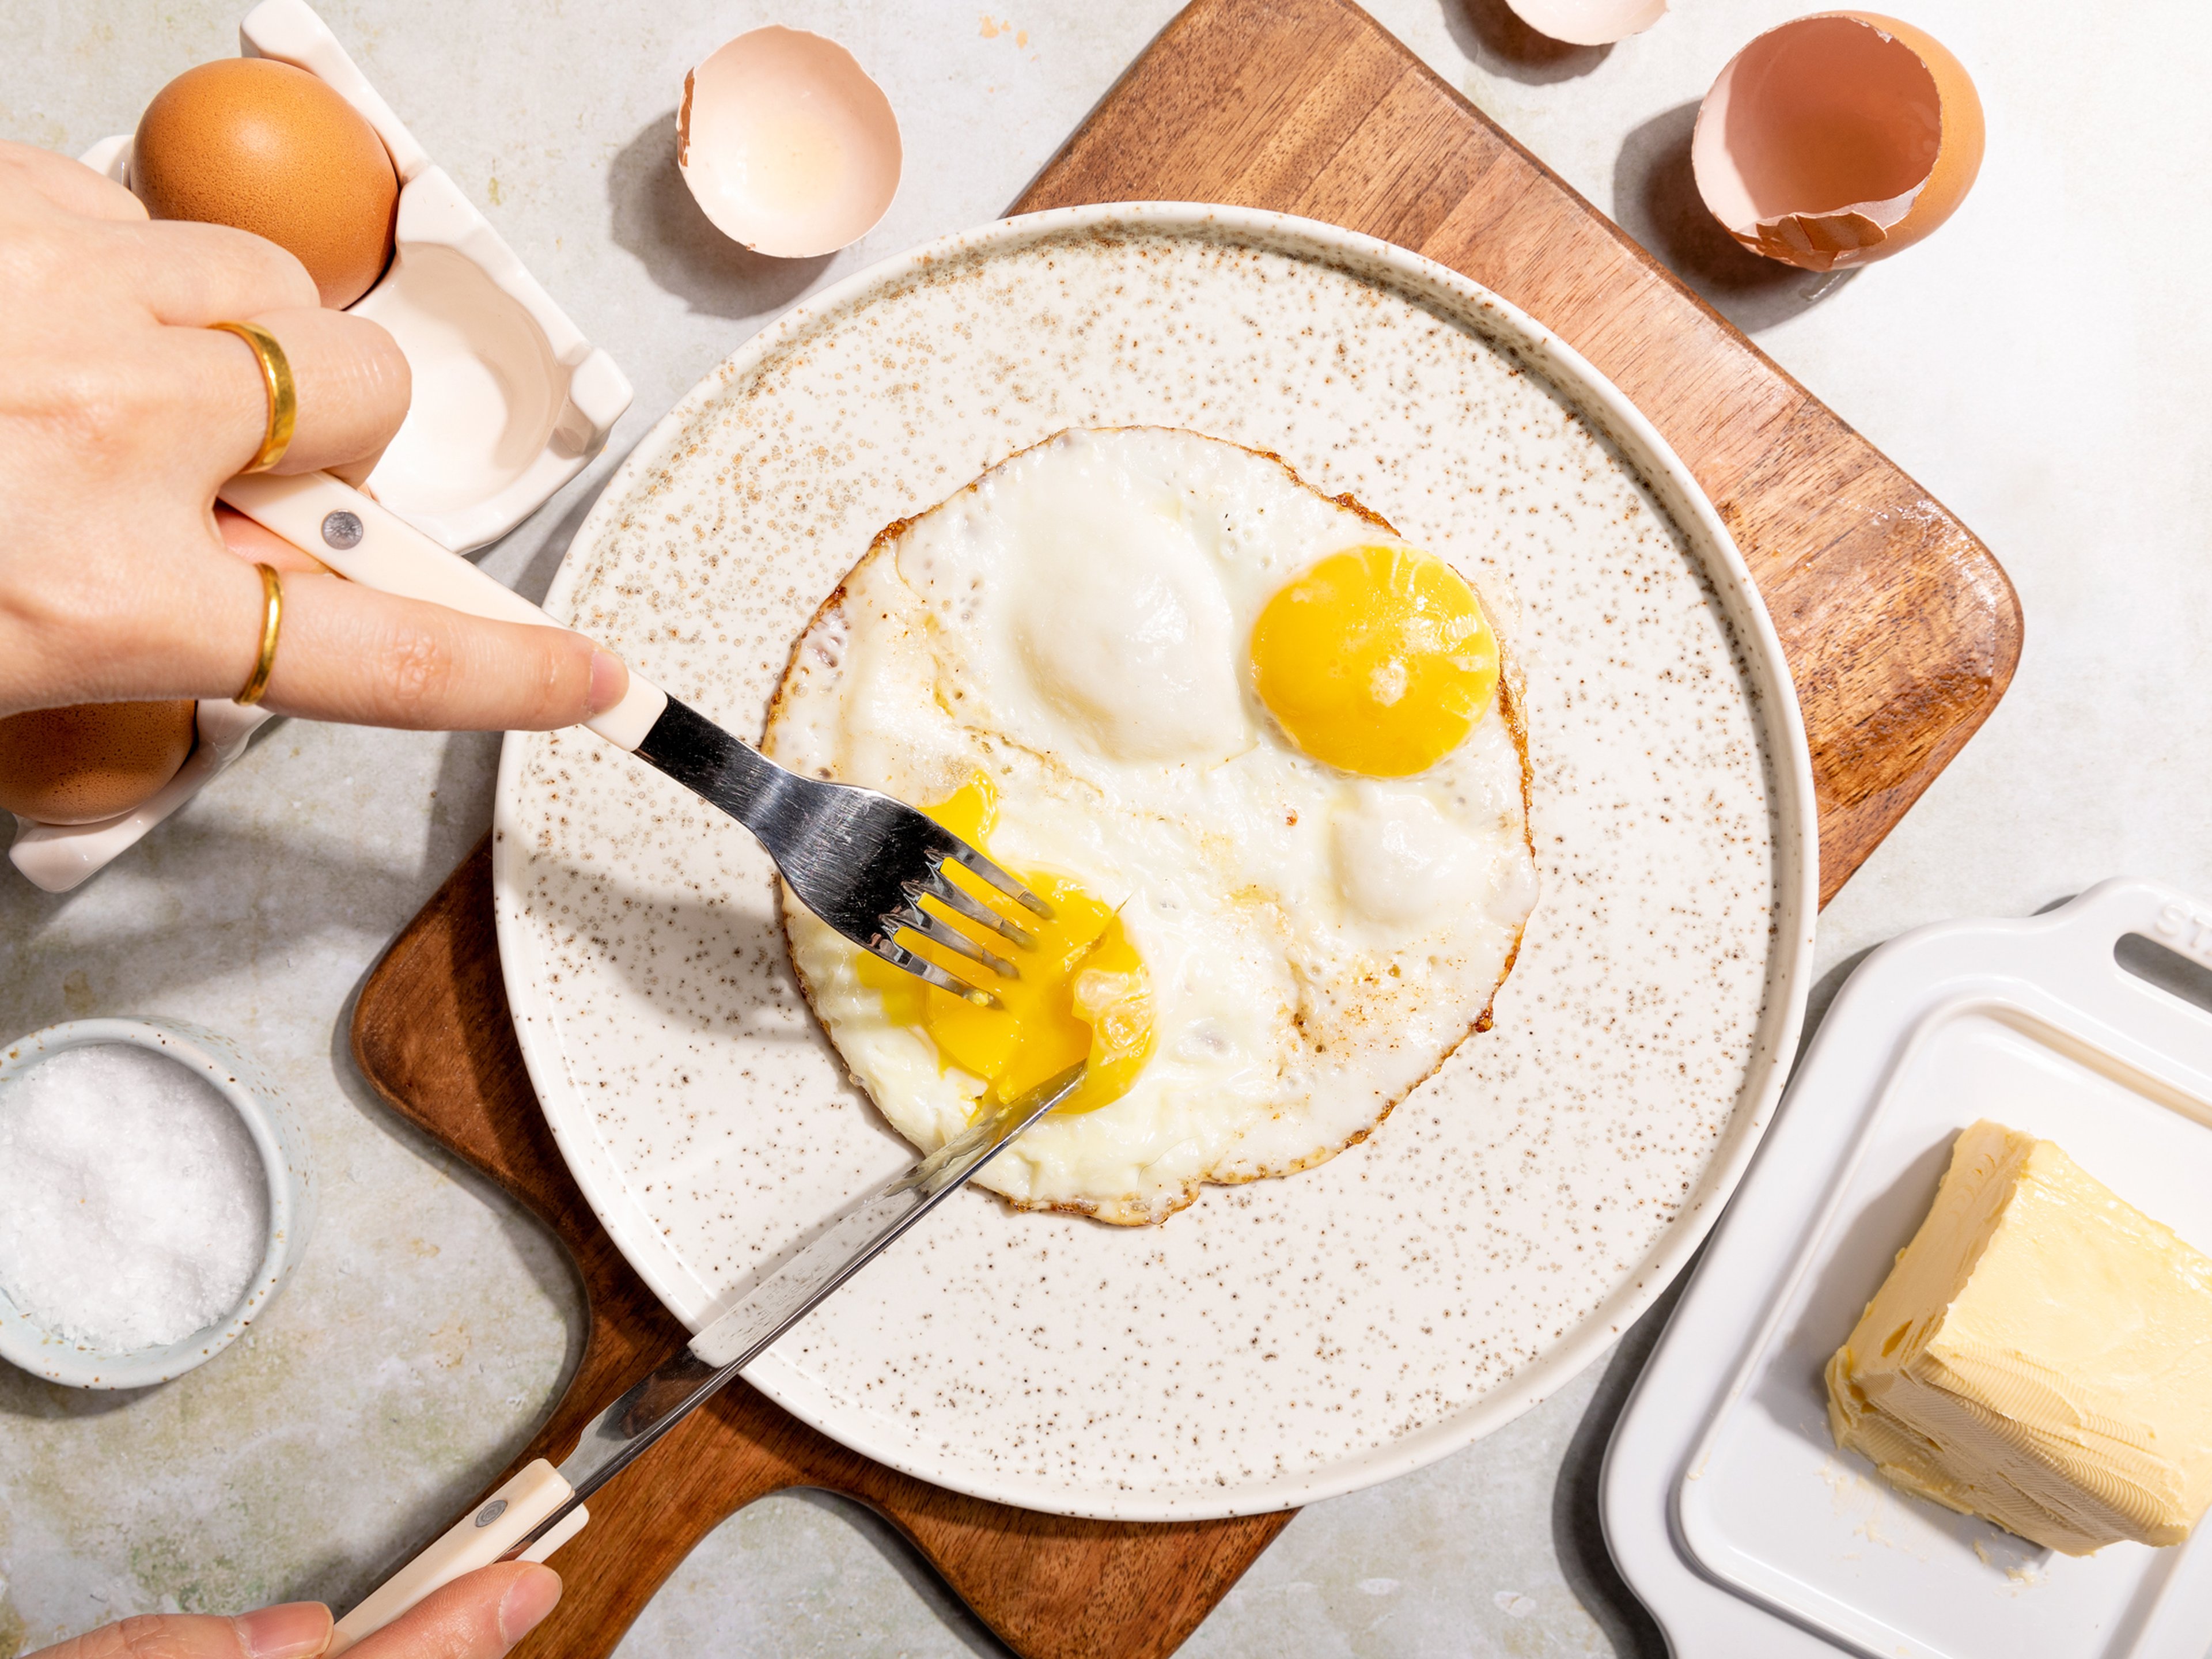 6 Affordable Gadgets to Get You Egg-cited to Cook With Eggs